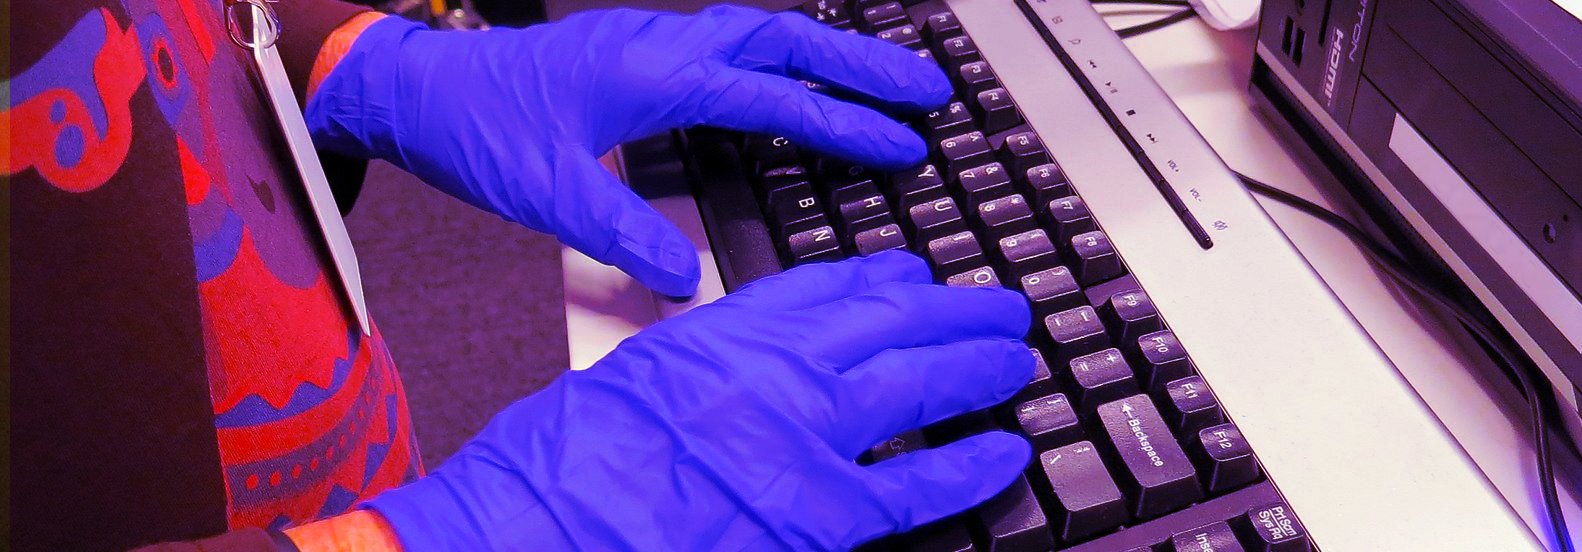 man's hands in latex gloves typing on keyboard